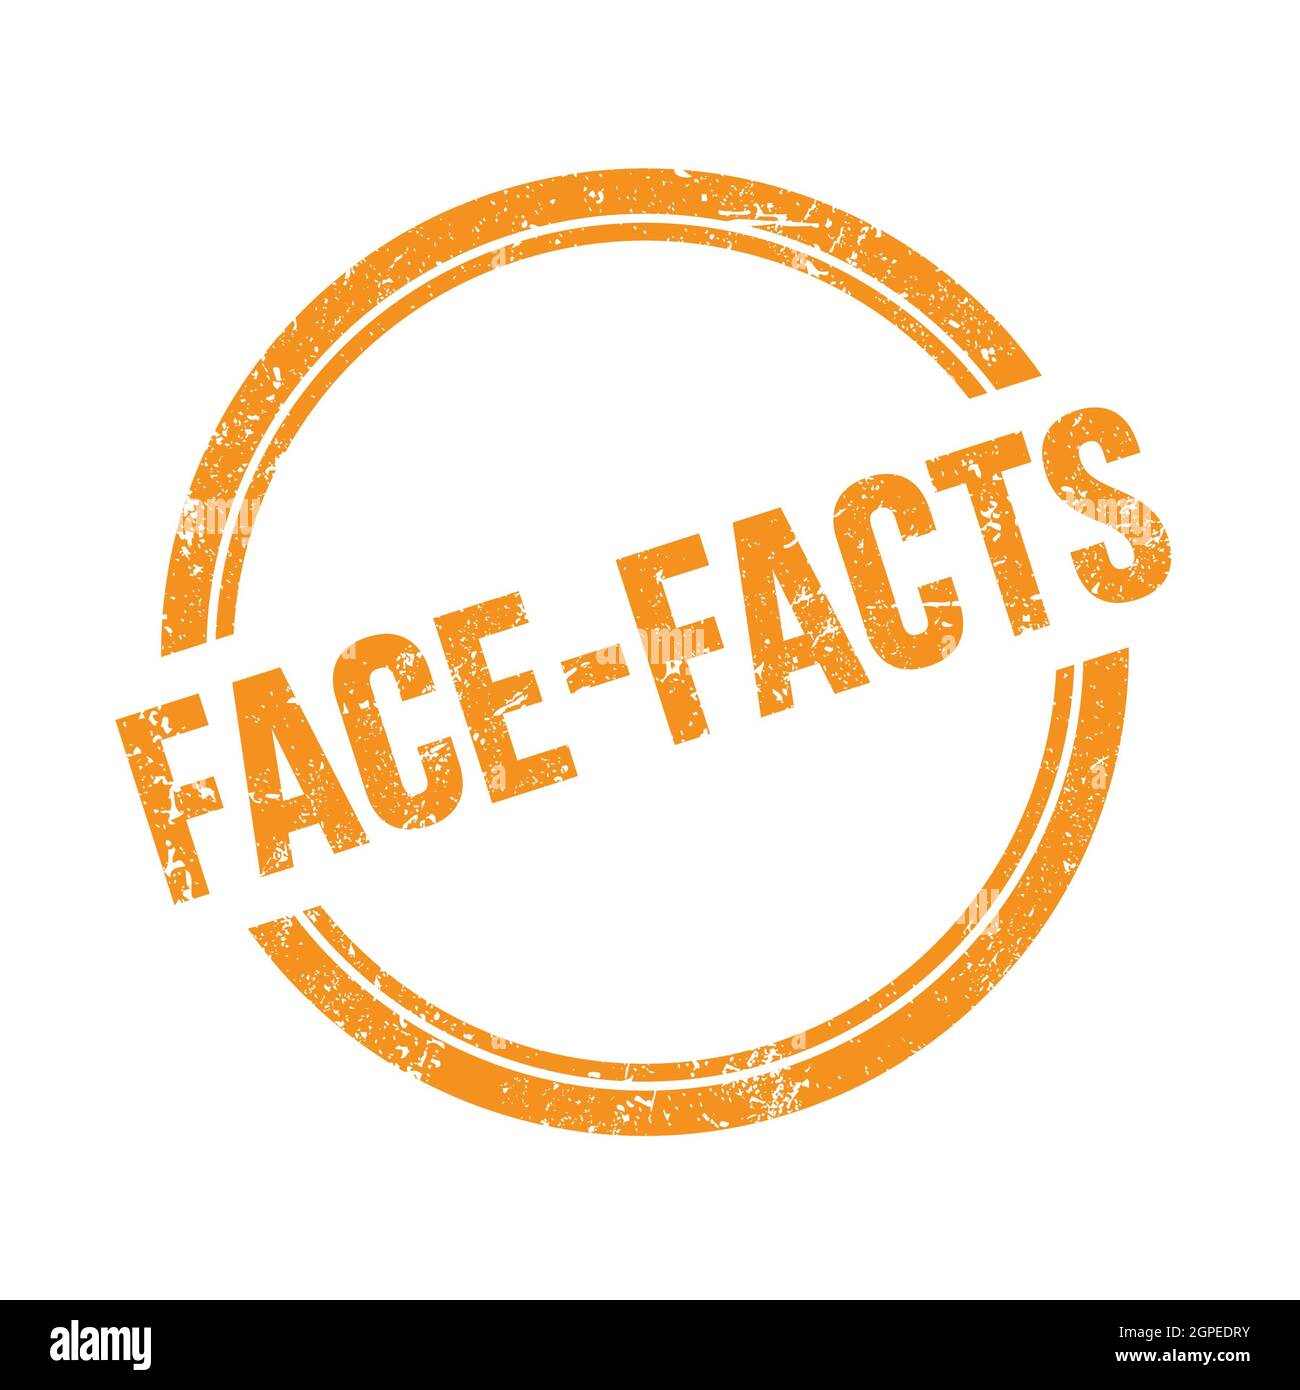 FACE-FACTS text written on orange grungy vintage round stamp. Stock Photo